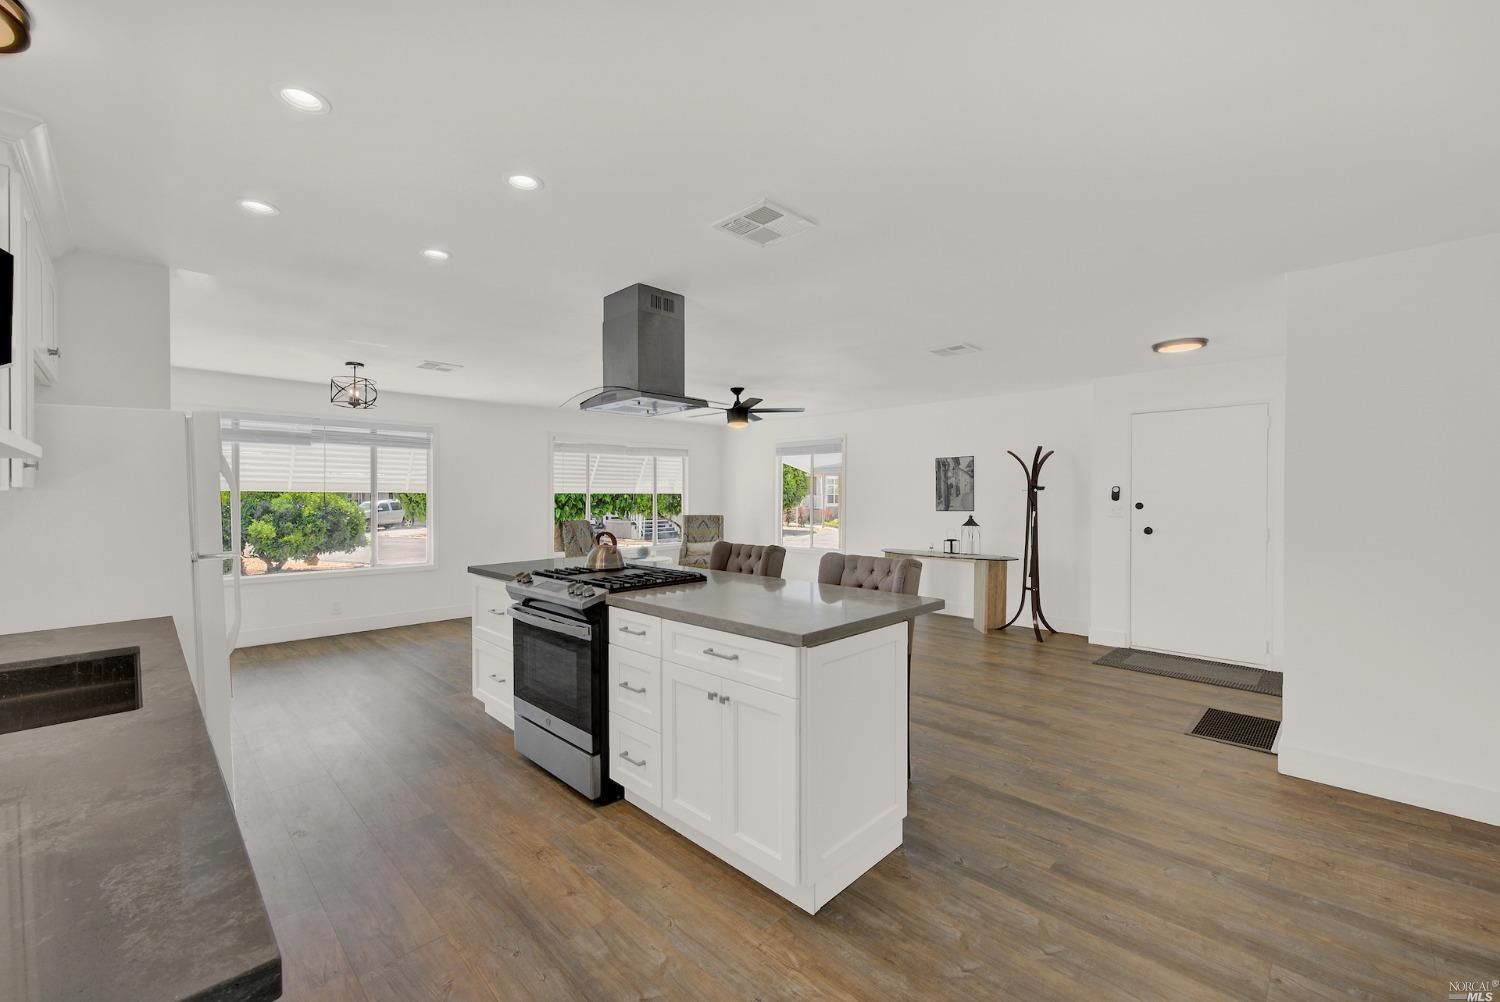 a kitchen with stainless steel appliances a sink stove and wooden floor